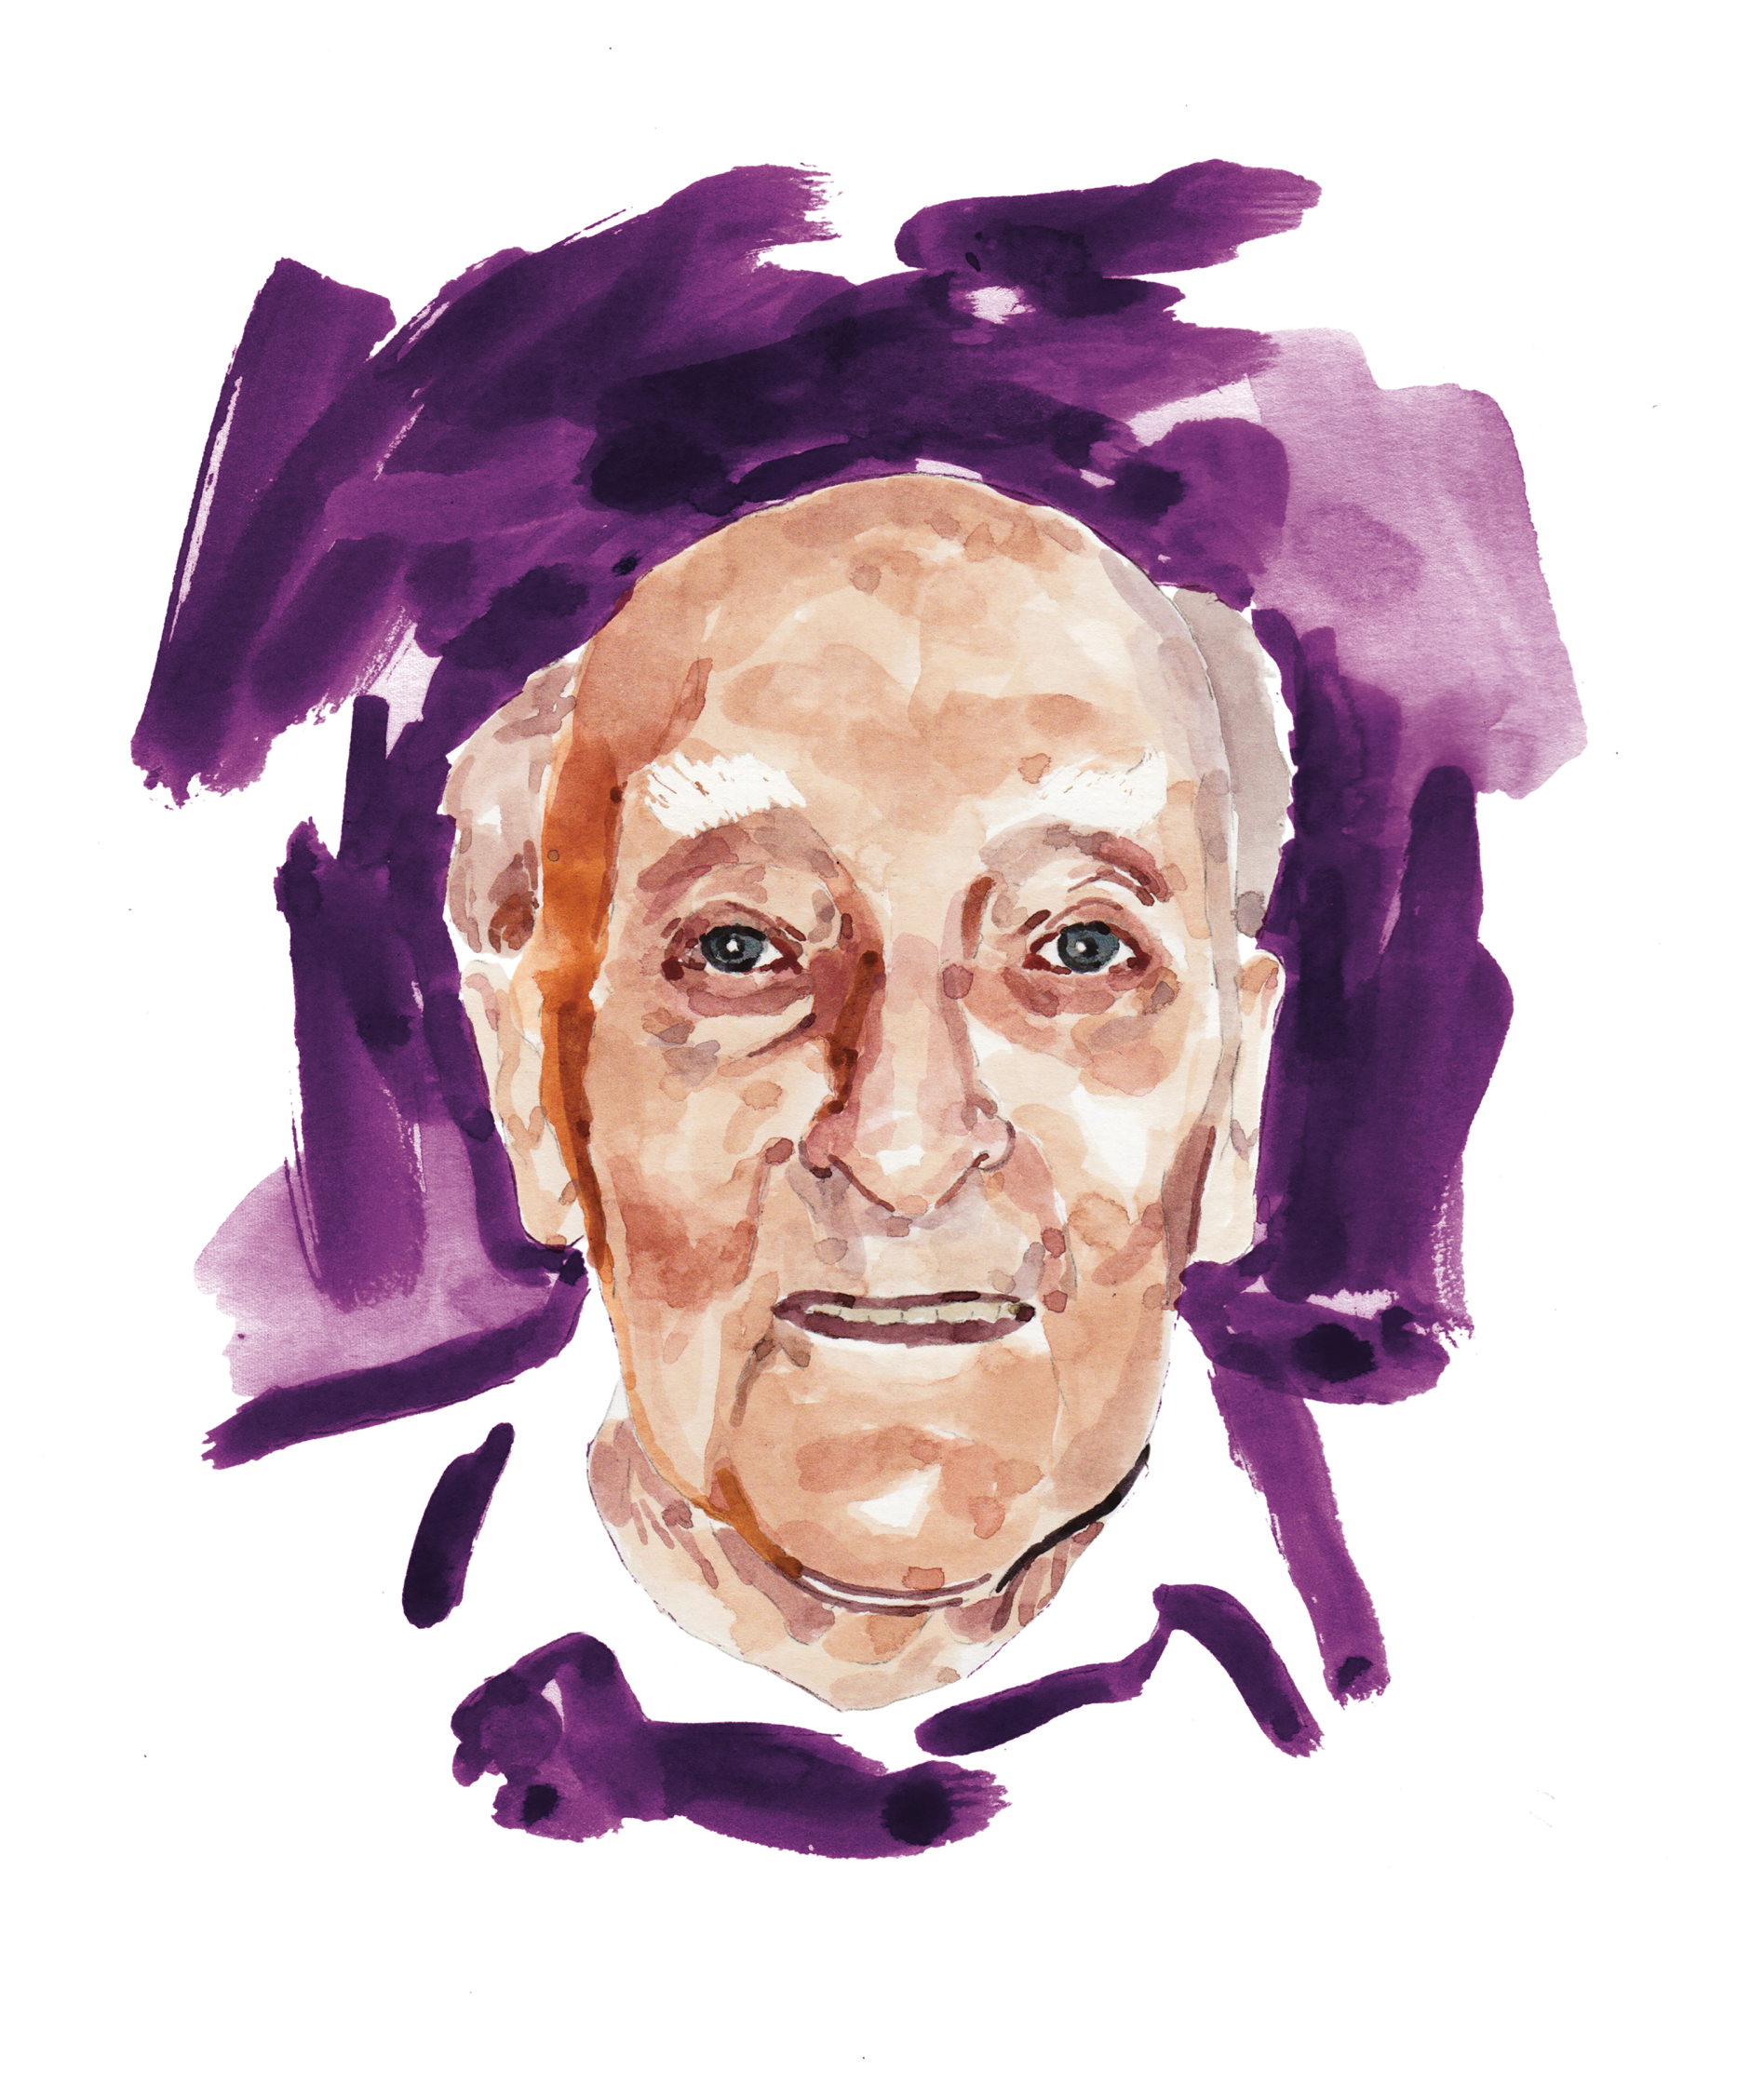 COMMISSIONED_BY_JOHN_BROWN_MEDIA_FOR_A_FEATURE_ABOUT_CENTENARIANS_JOHN_HEADLEY.jpg